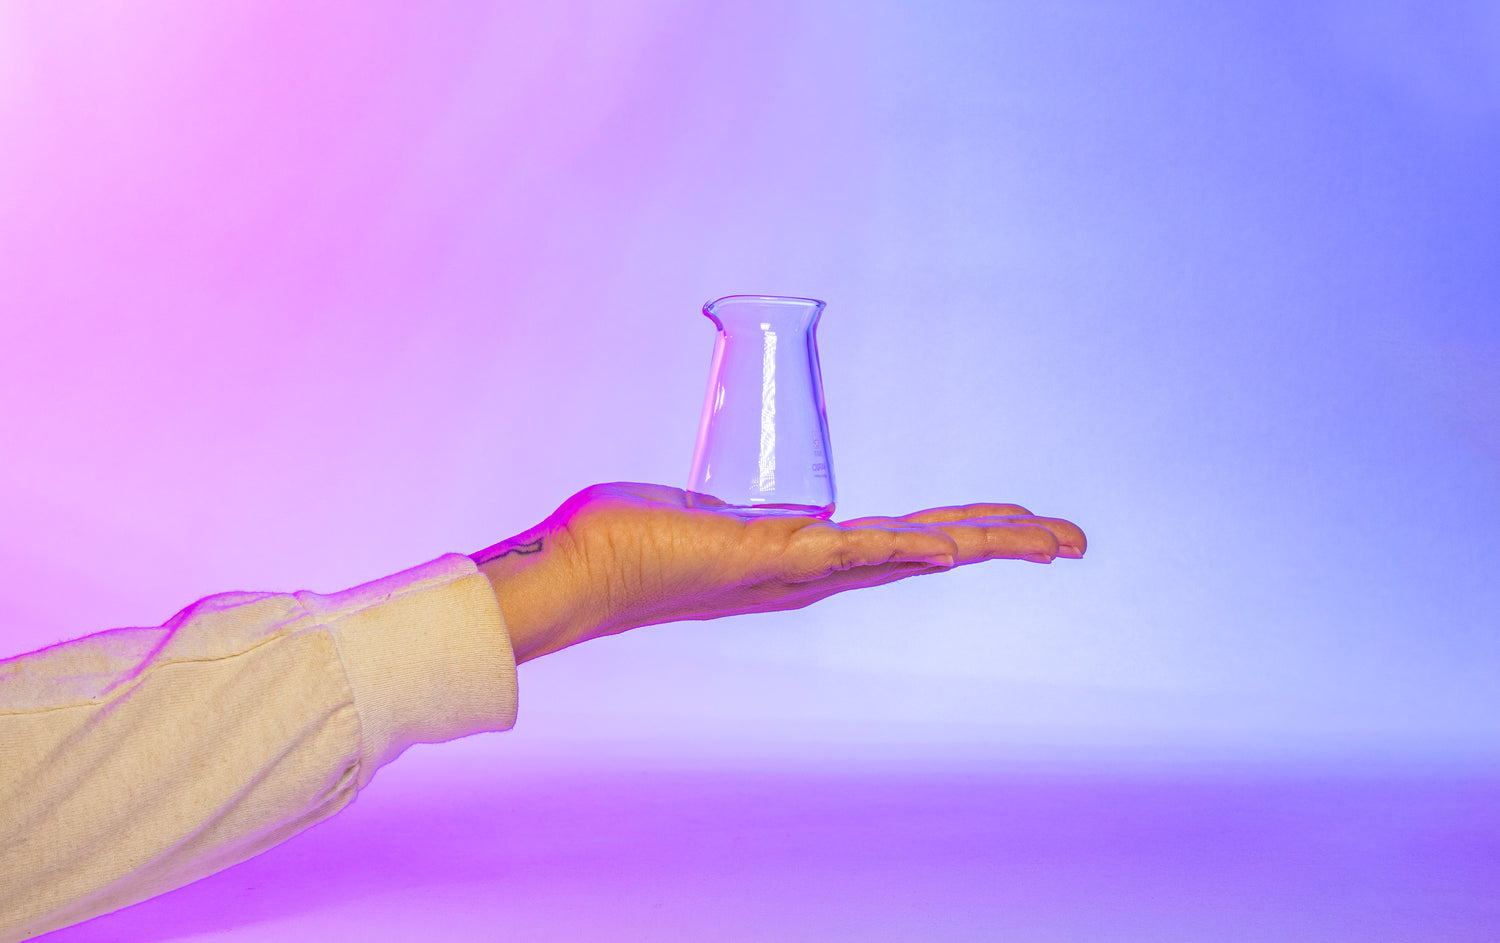 Tiny 50 millileter conical glass flask-shaped coffee pitcher sitting on open hand with white long sleeve shirt against a purple, pink, white, and blue background.